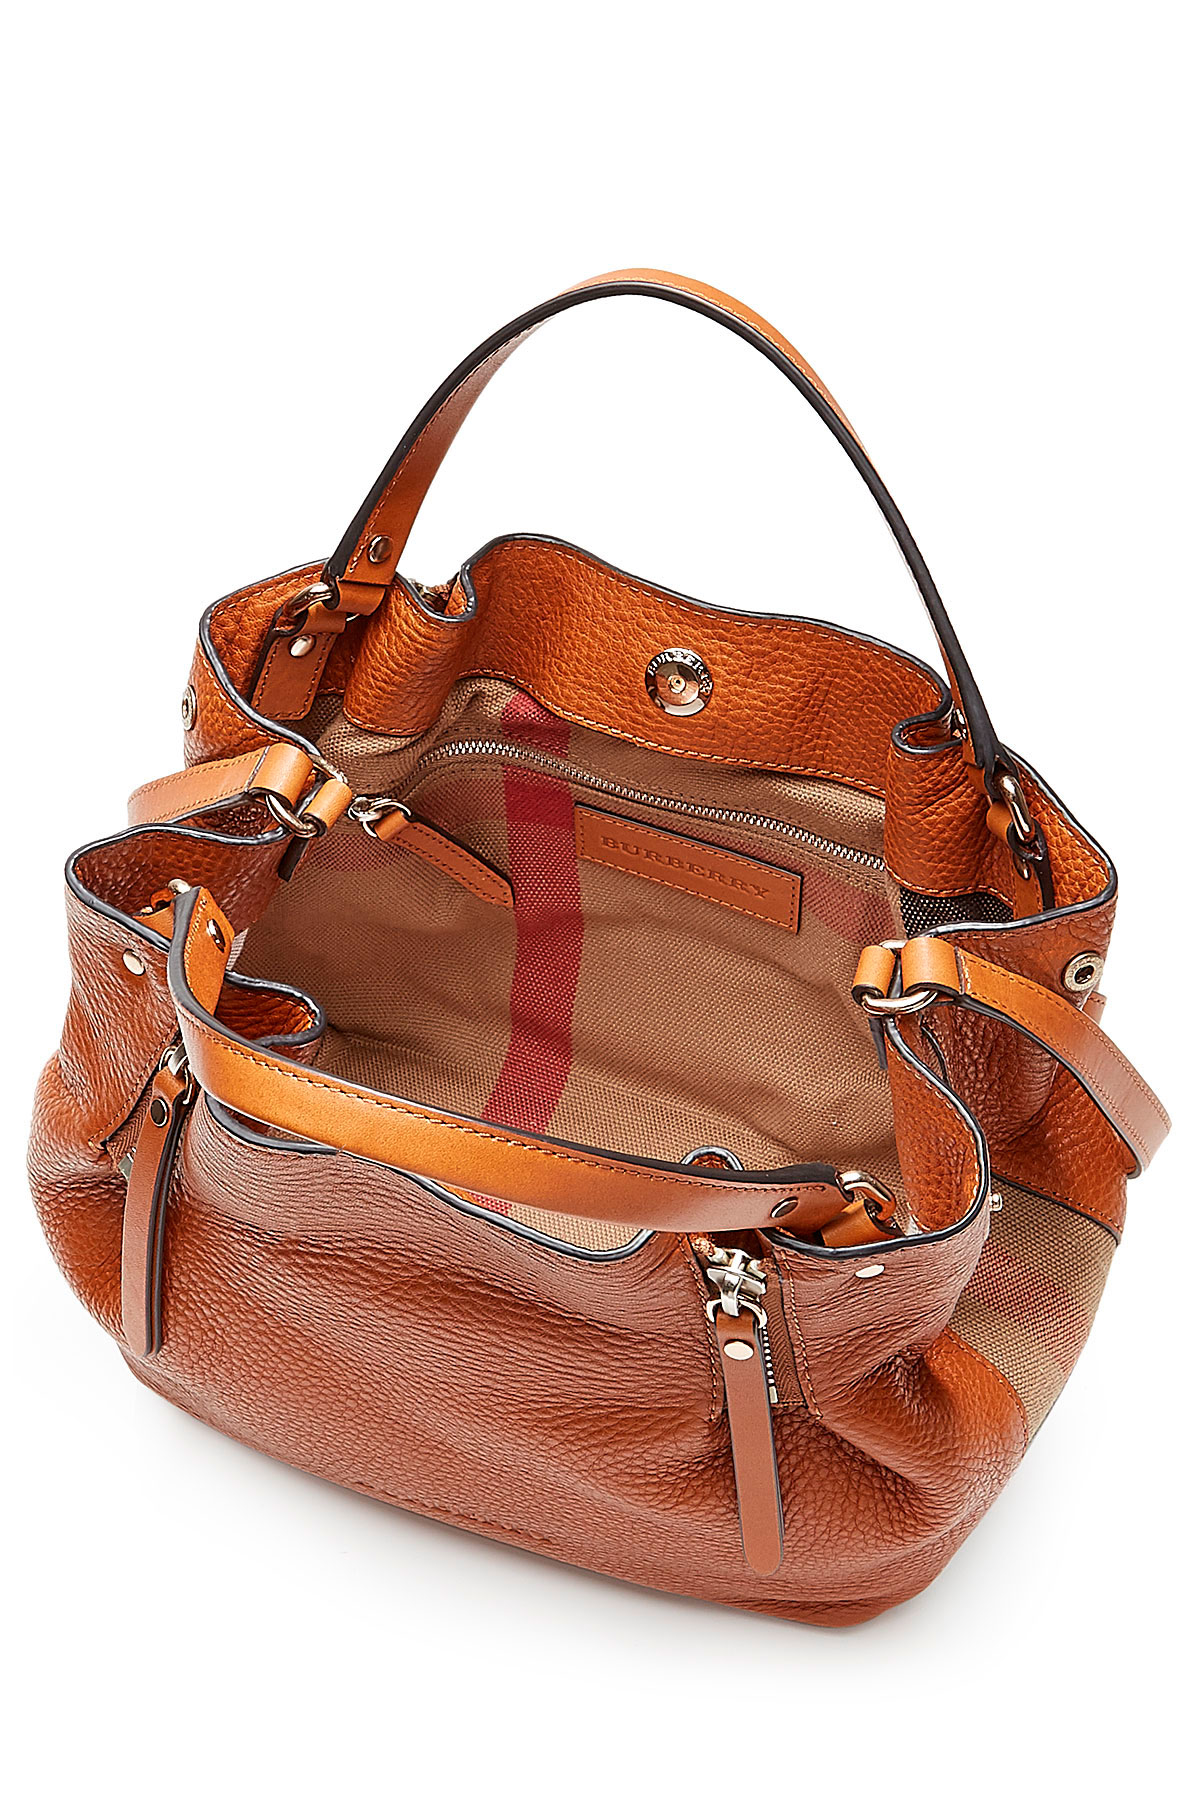 Burberry Leather Shoulder Bag With Printed Fabric - Brown in Brown - Lyst